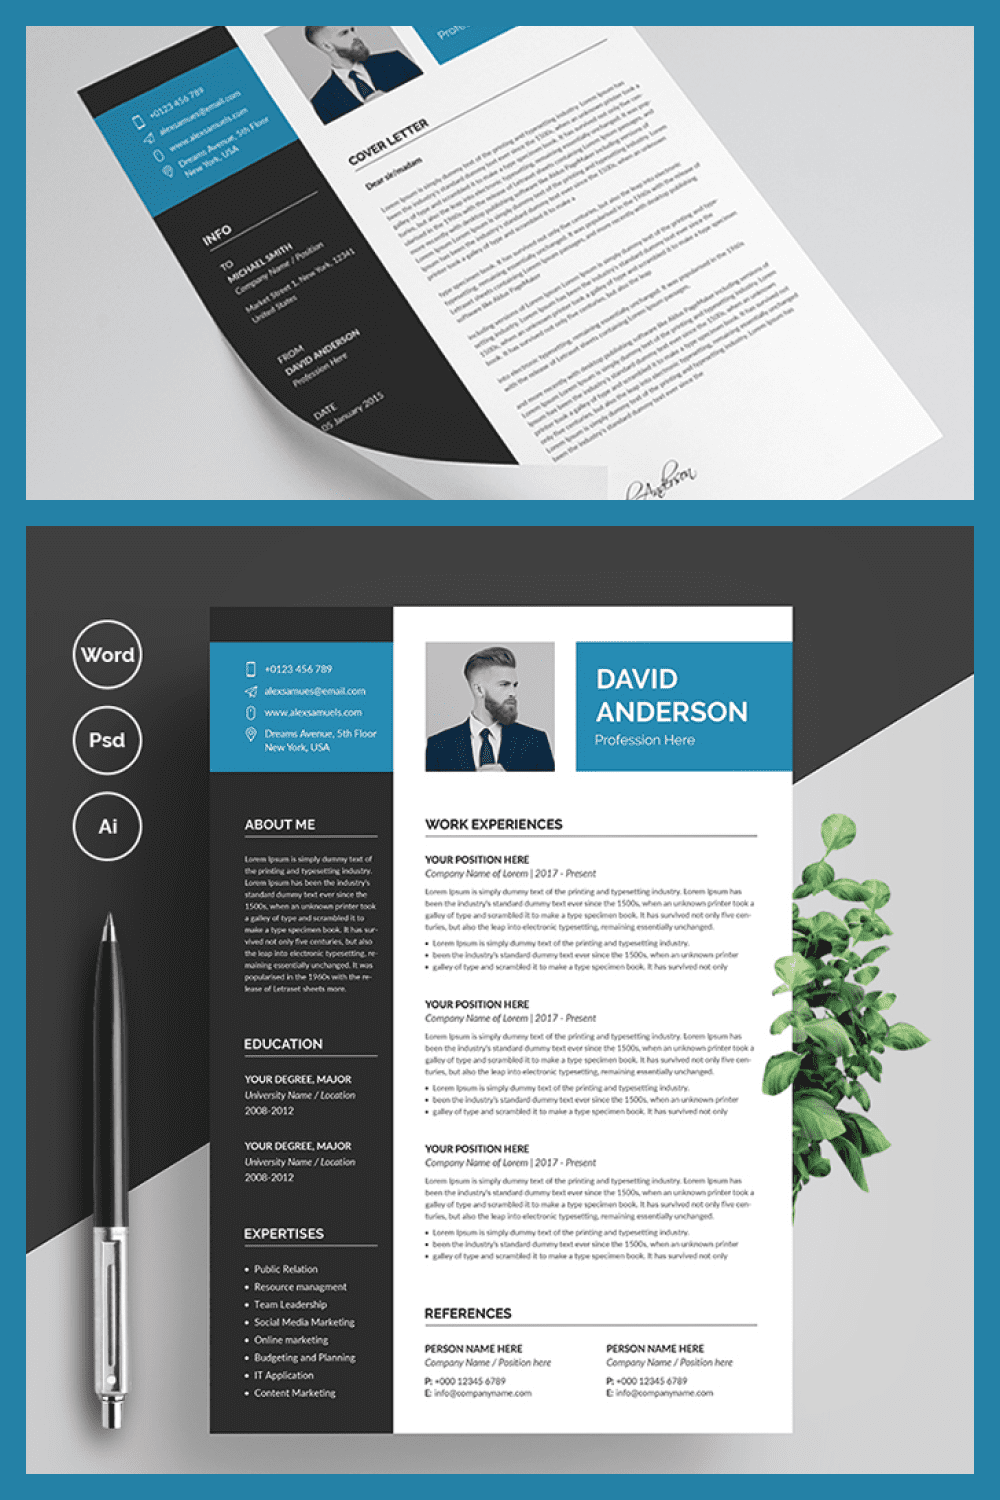 Blue and black resume template with a blue background.